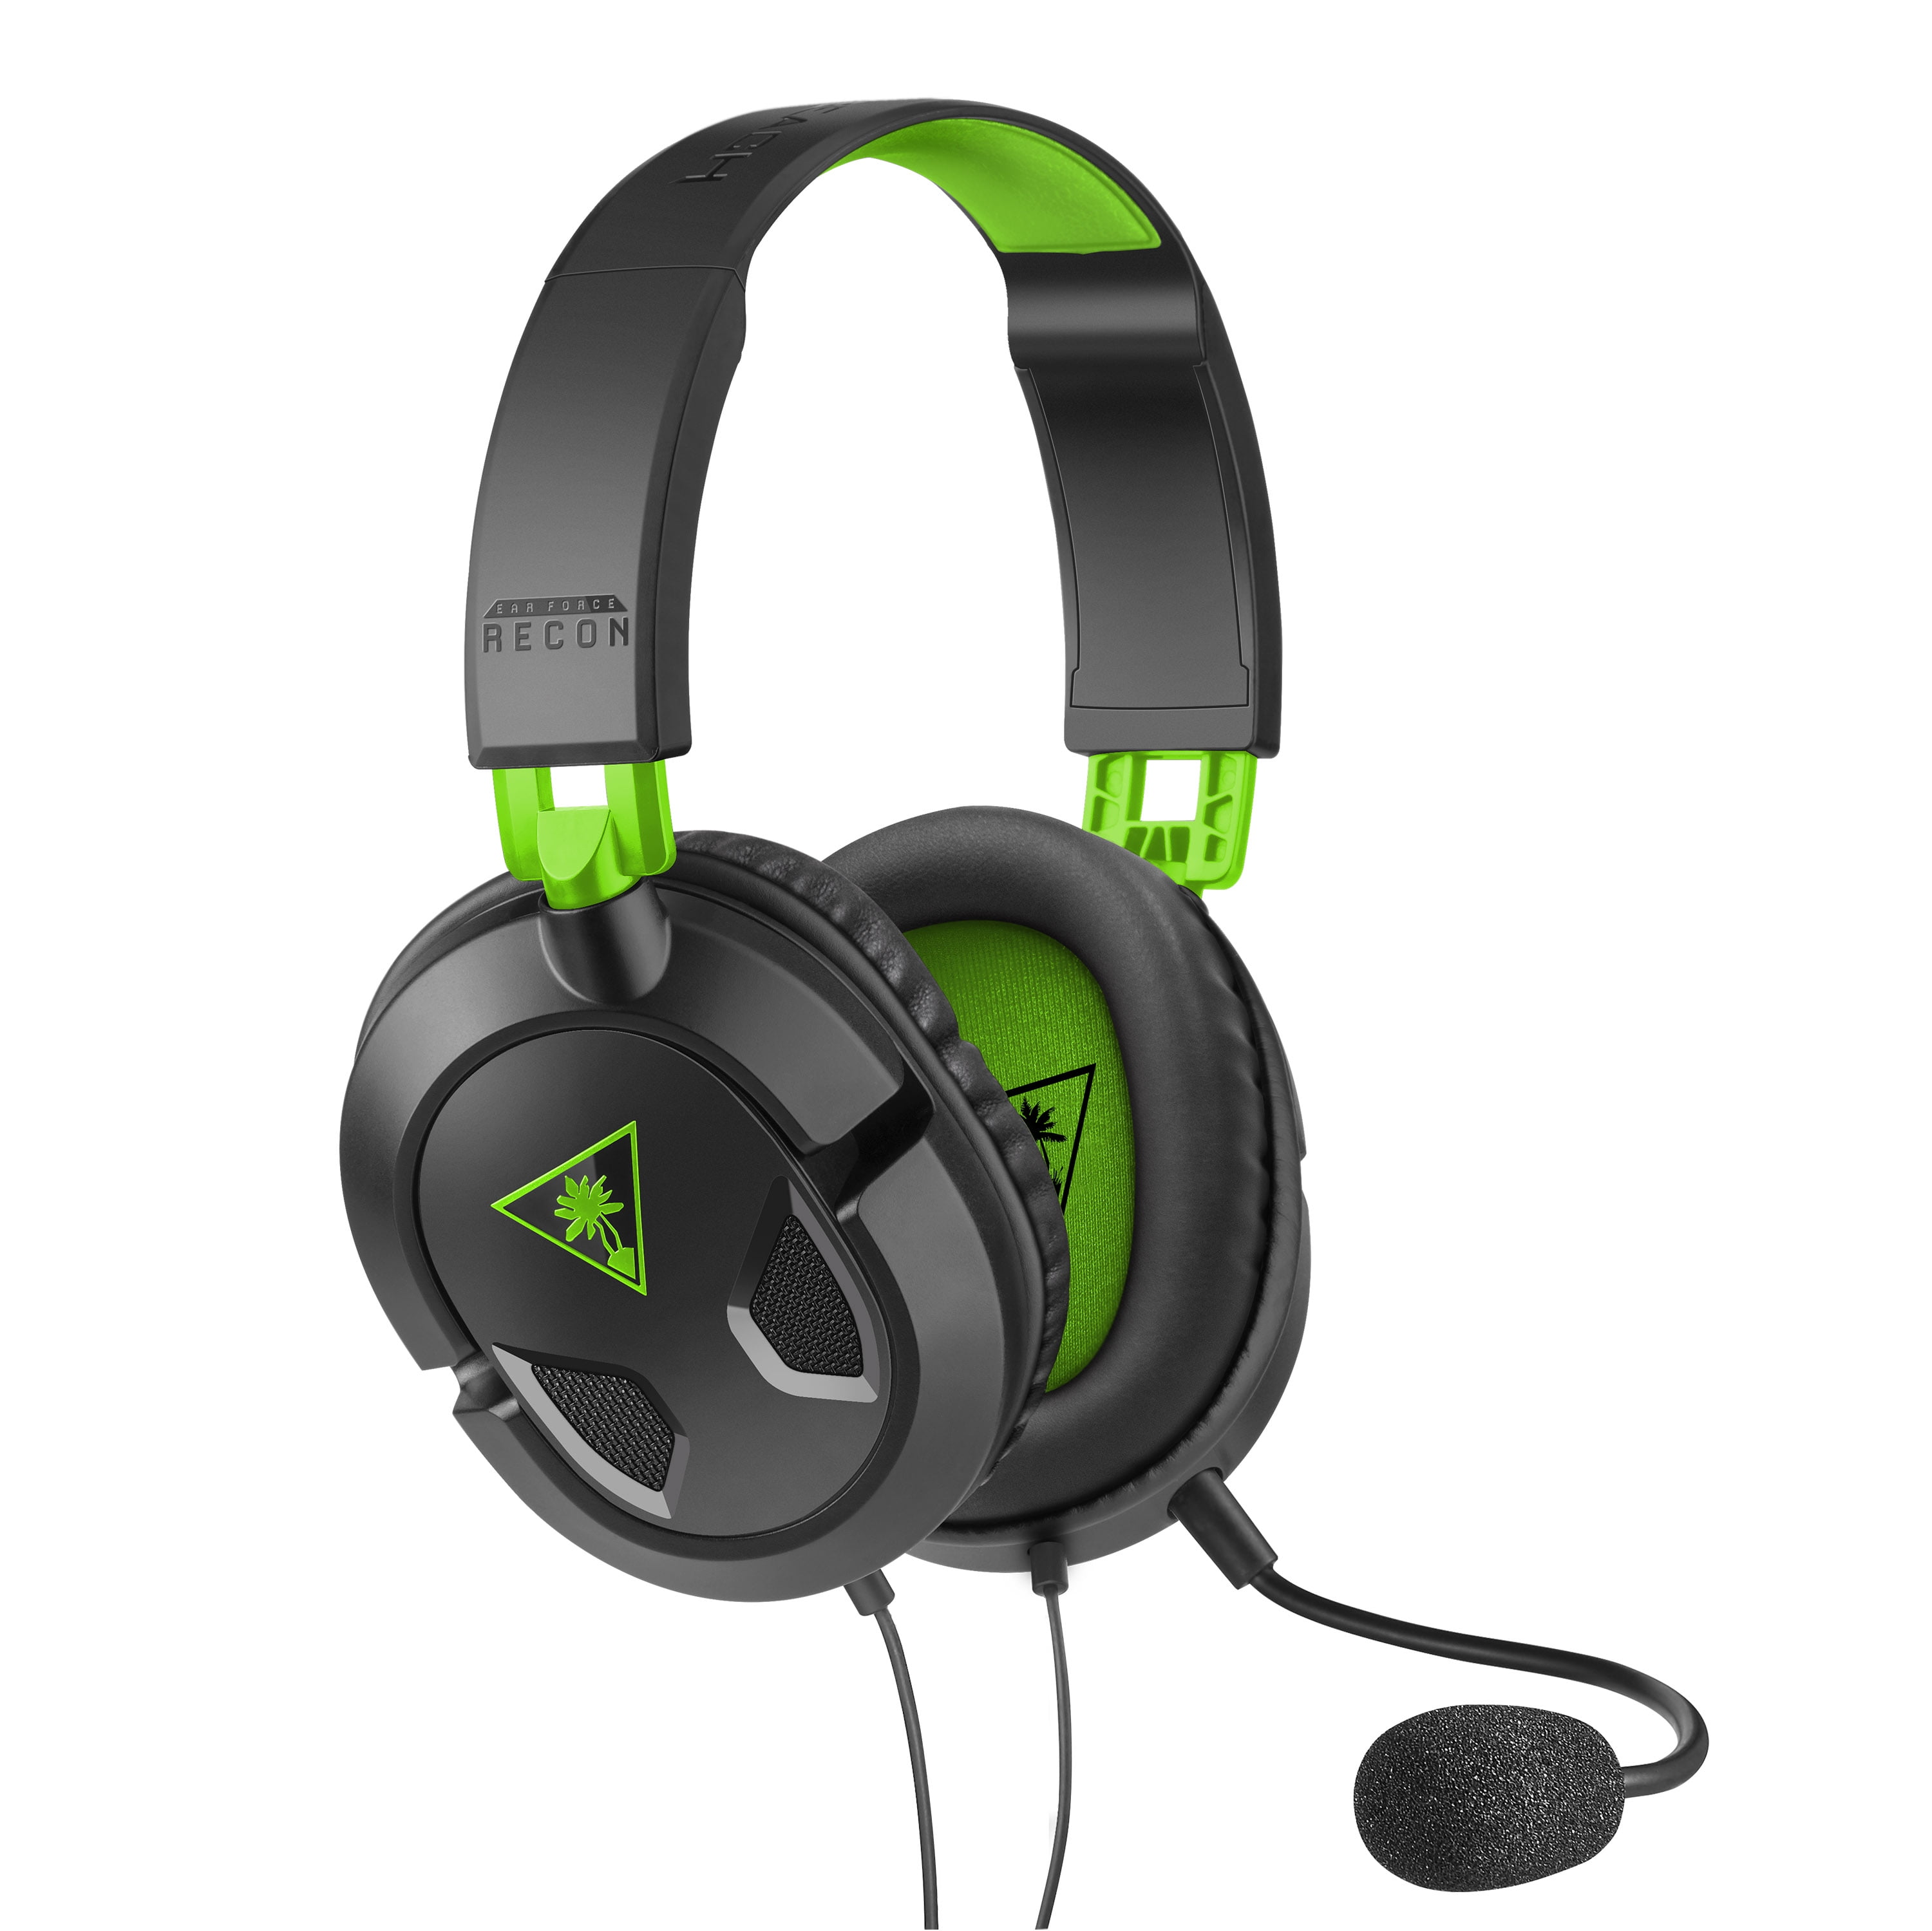 Headset For Xbox One Clearance, 56% OFF | www.emanagreen.com